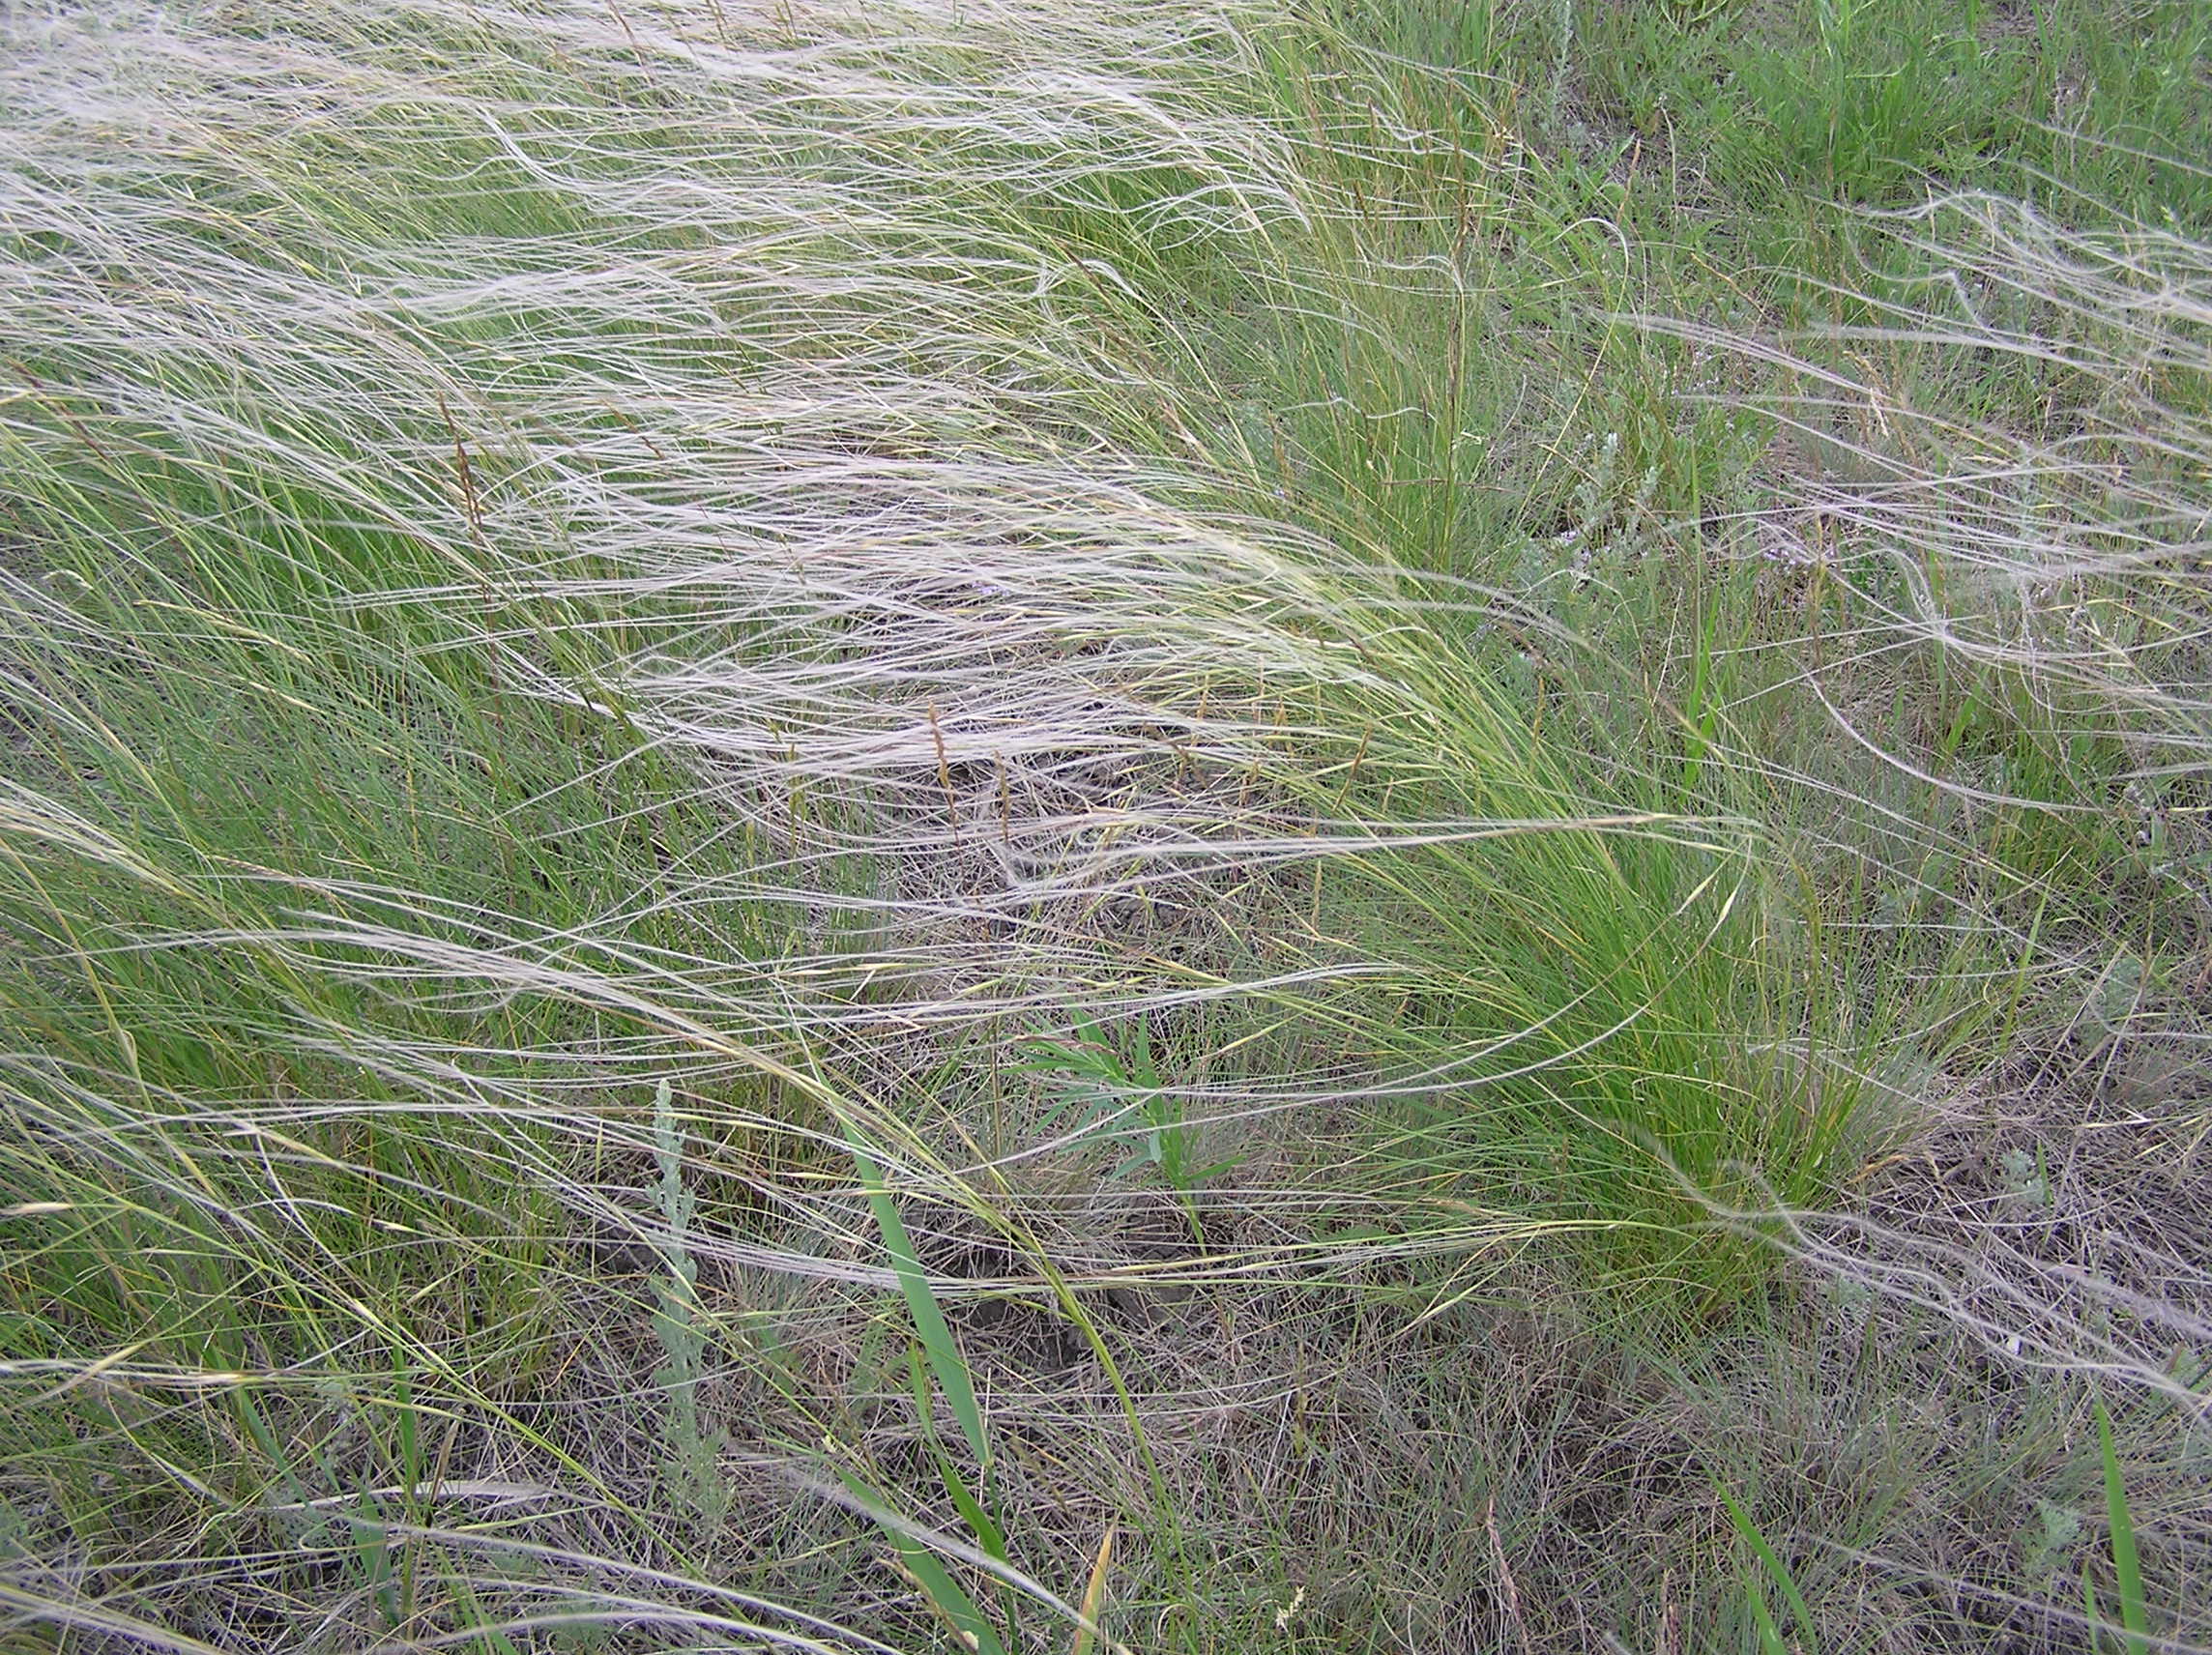 Photograph of Lessing feather grass. The photo shows Lessing feather grass plants with feathery inflorescences.